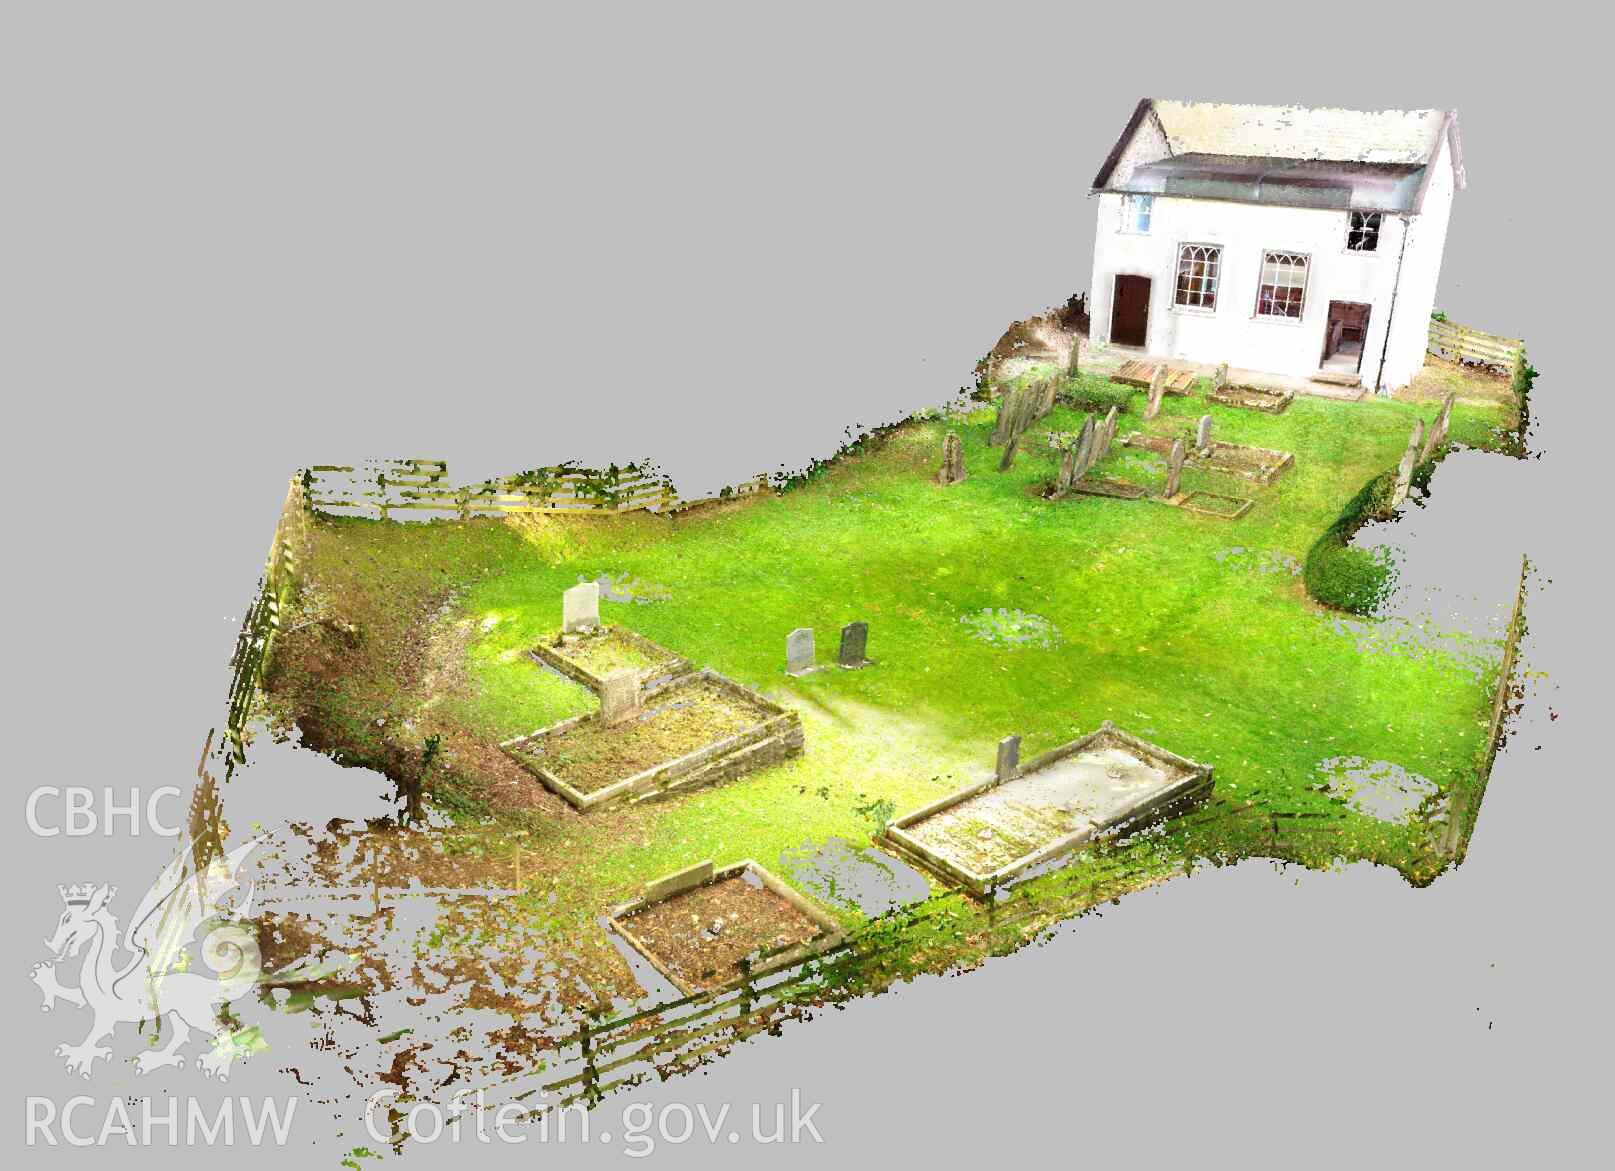 View of Carmel Chapel and graveyard looking northwest (taken from laser scan survey point cloud). Part of the Terrestrial Laser Scanning Survey archive for Carmel Chapel, Nantmel, carried out by Dr Jayne Kamintzis, September 2022.